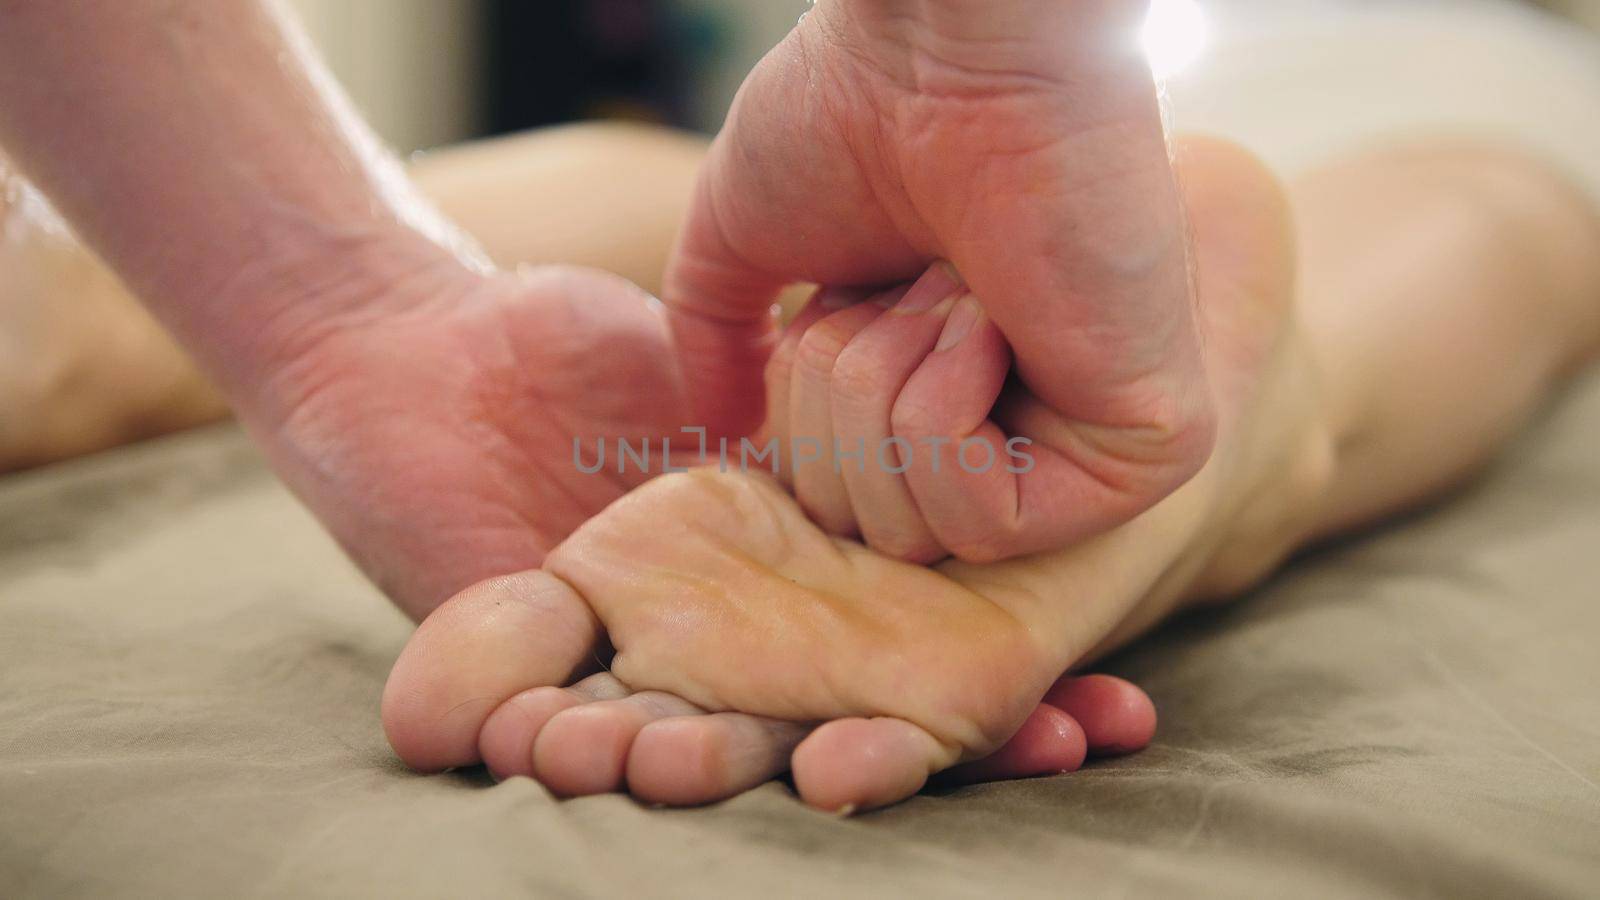 Foot massage in the spa salon - relaxation therapy, cosmetic and healthcare concept, close up